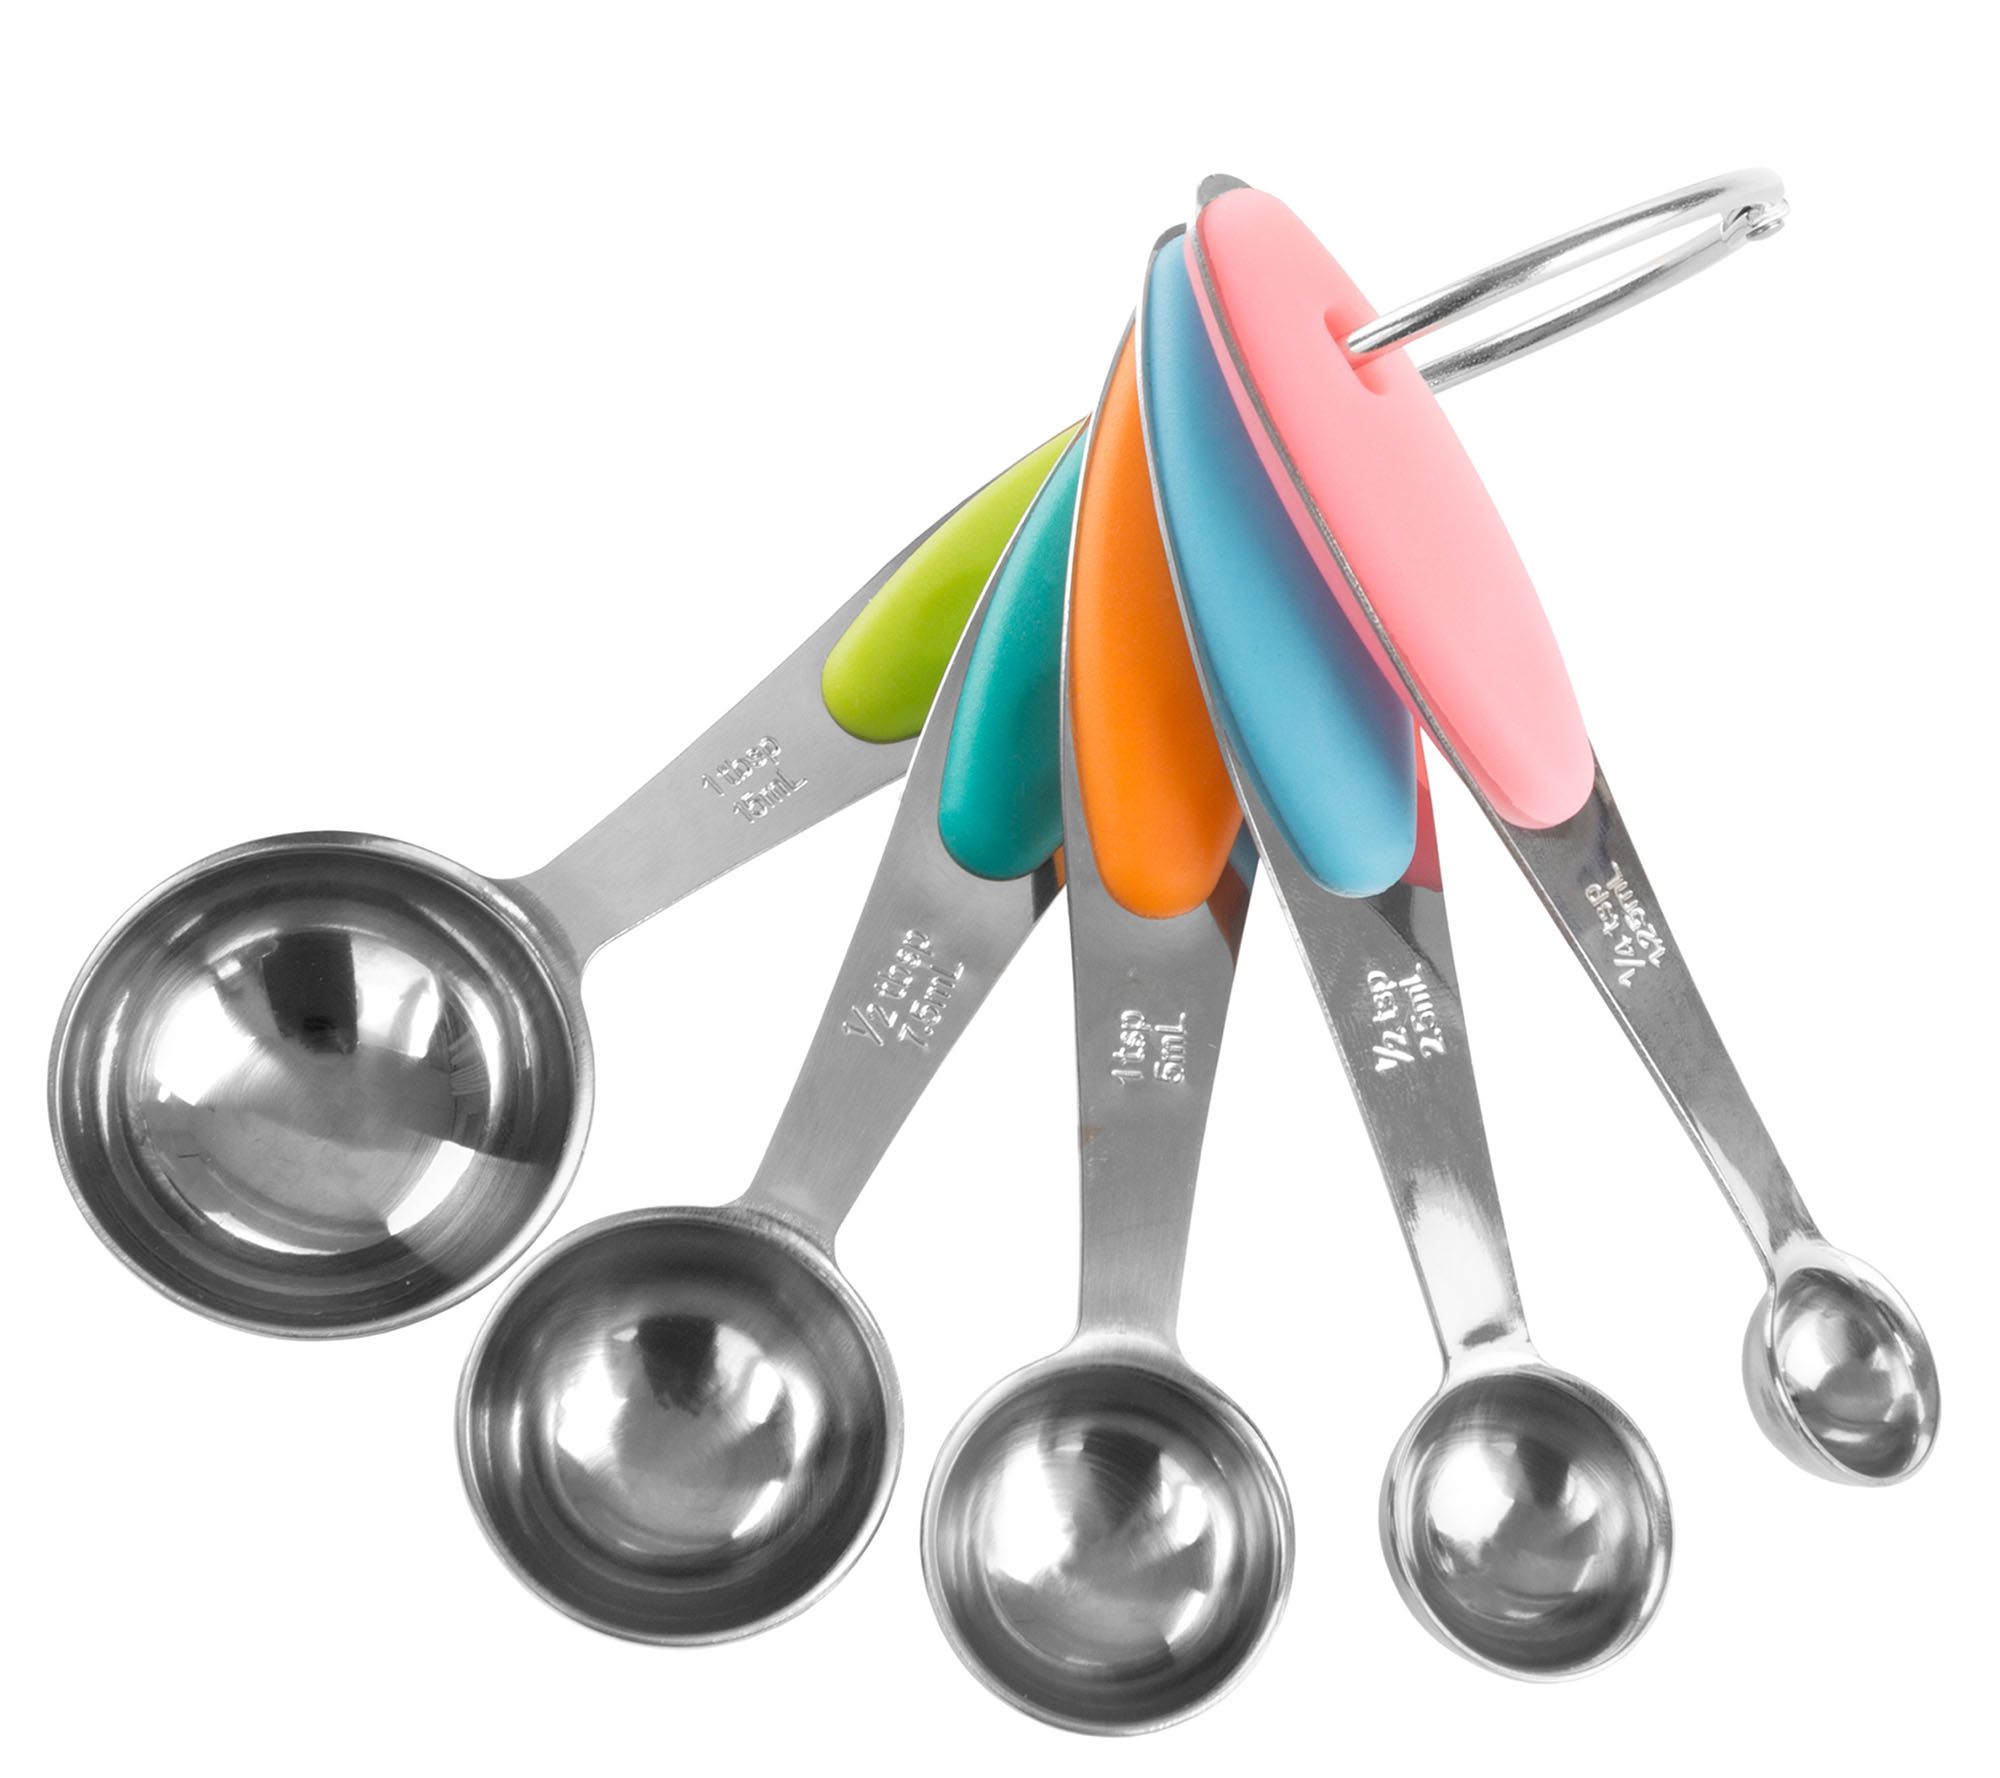  Le Creuset Stainless Steel Measuring Spoons, Set of 5: Home &  Kitchen